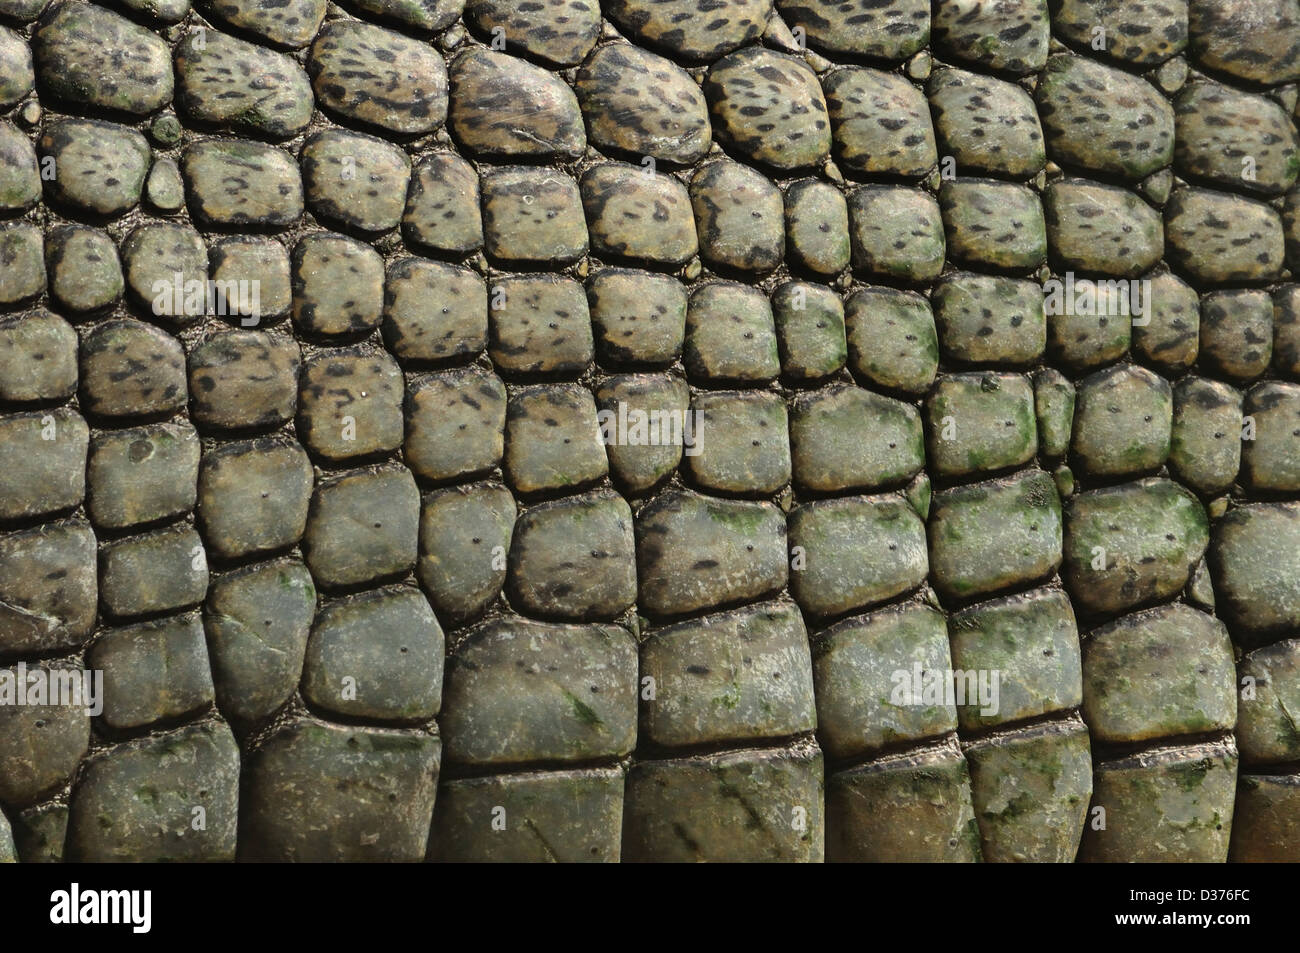 Scales of Gharial Crocodile Stock Photo